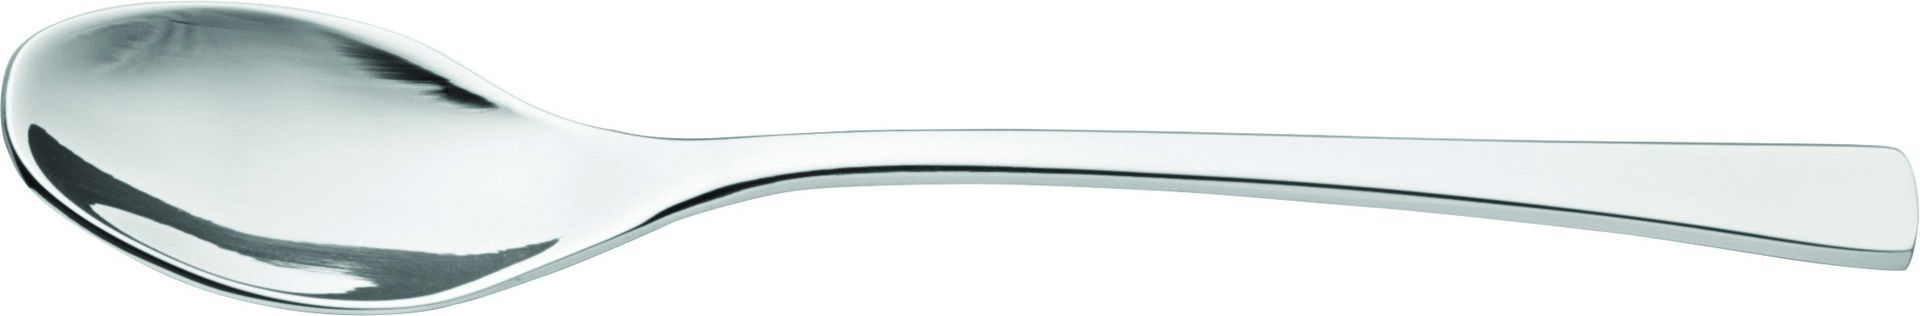 Curve Coffee Spoon - F38009-000000-B01012 (Pack of 12)